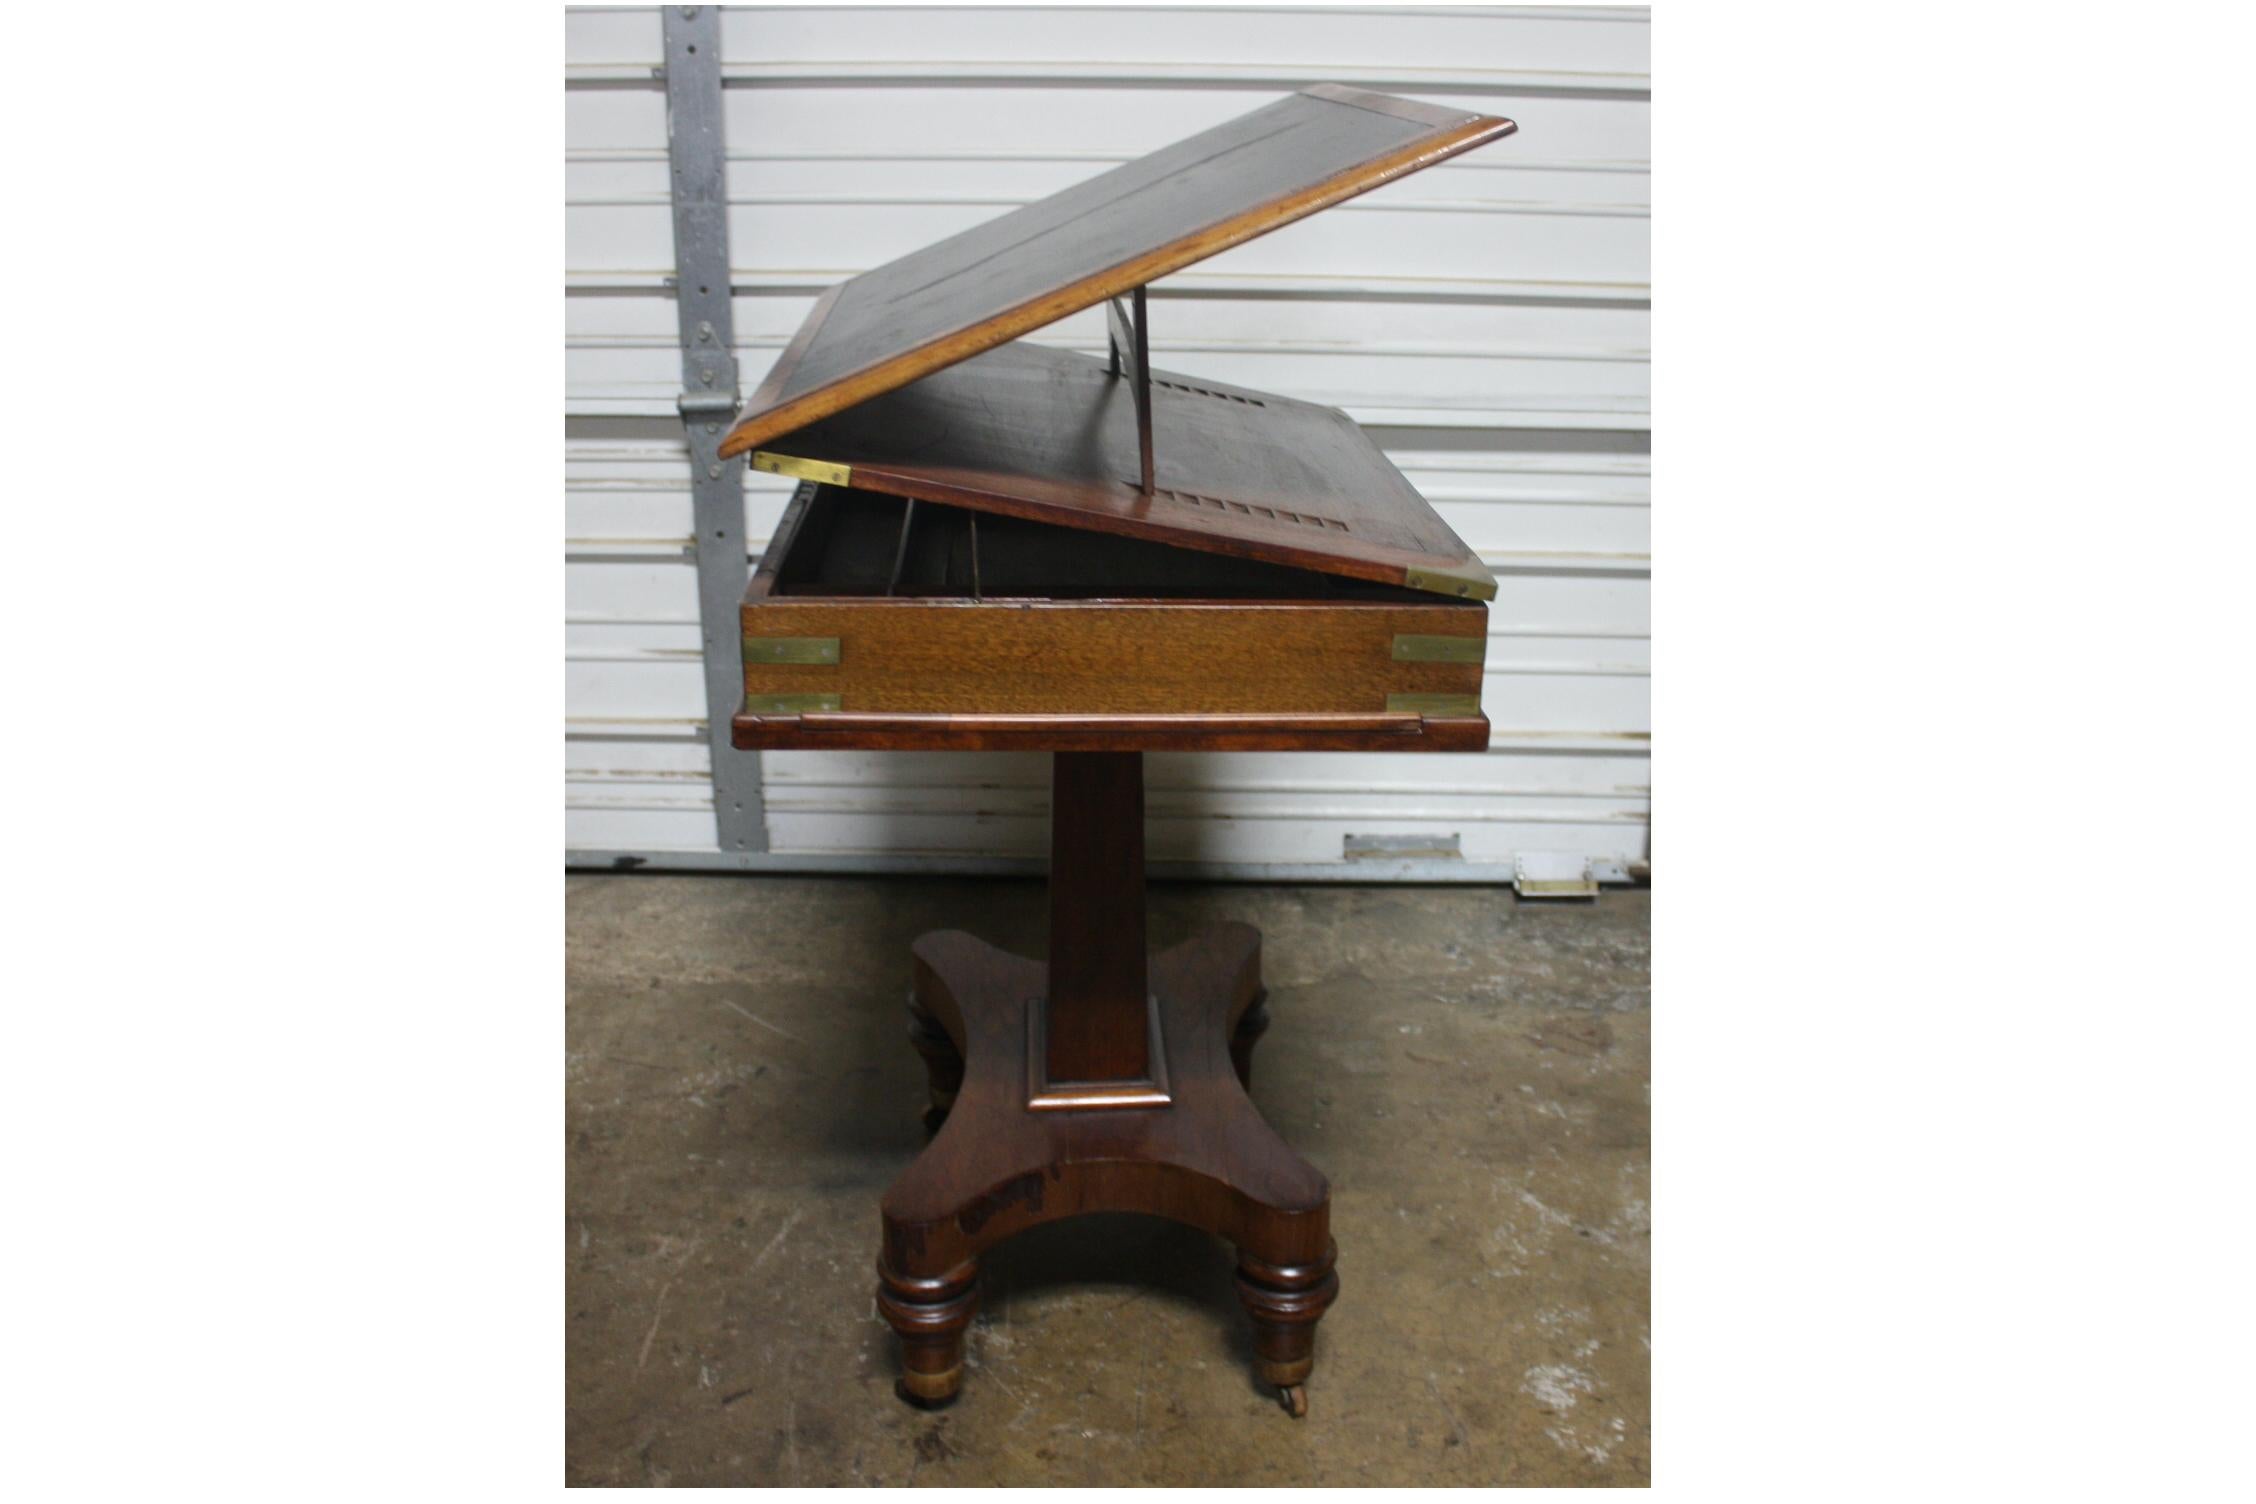 This is an 19th century watercolorist table. Very rare piece in a good condition. It has 2 levels, 1 is to put the colors and the other one is to rise up the leather board.
When the system is opened, the hight is 41''H
Just beautiful!.